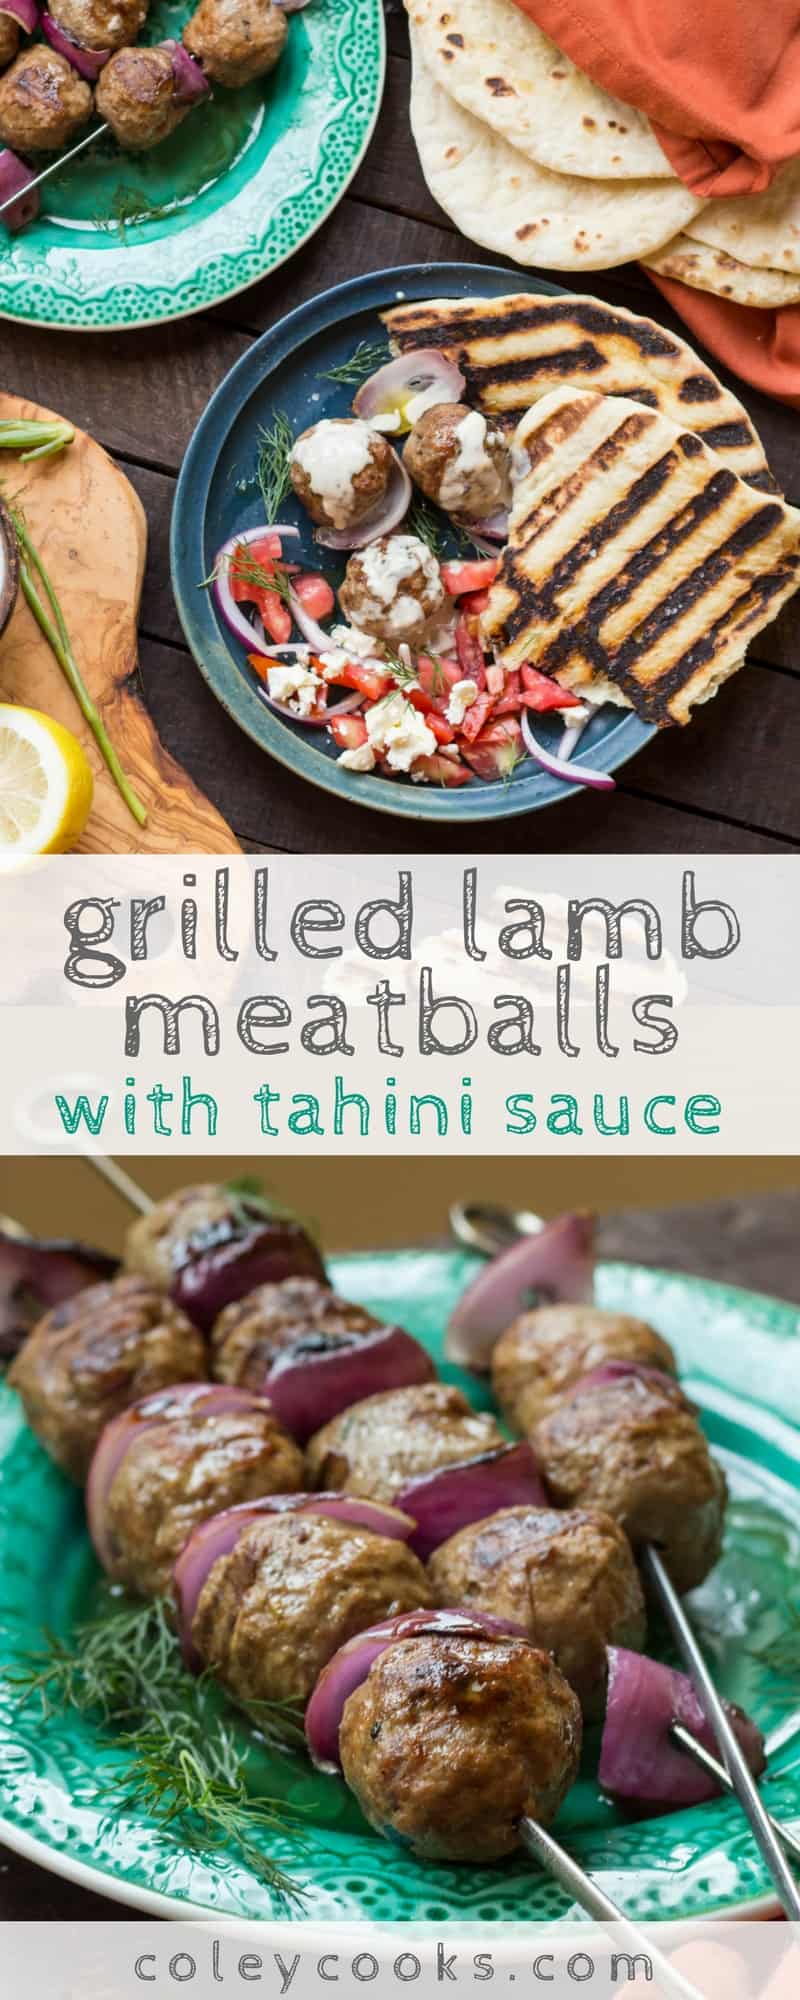 GRILLED LAMB MEATBALLS with TAHINI SAUCE | This simple recipe makes an easy and delicious weeknight dinner! They're full of flavor, gluten free and served with a lemony tahini sauce for dipping! #glutenfree| ColeyCooks.com